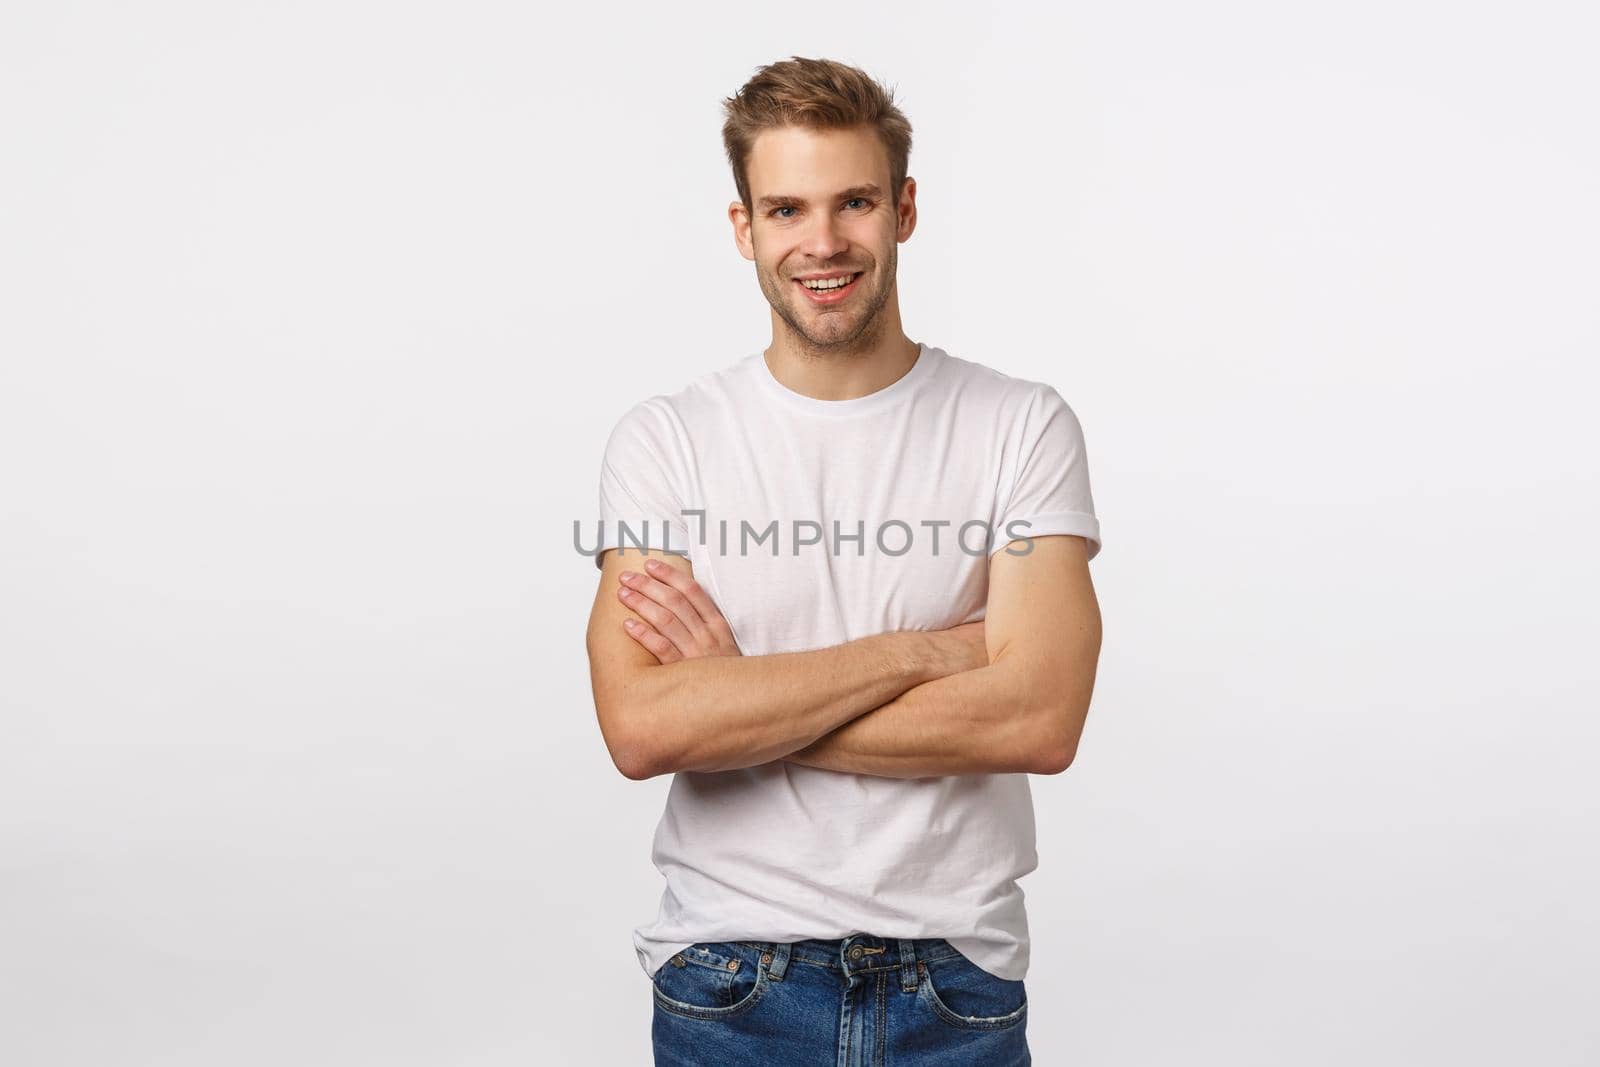 Enthusiastic, happy smiling blond man with bristle, white t-shirt, jeans, cross arms chest and grinning amused, hear interesting story, accepting good idea, agree with person, white background.